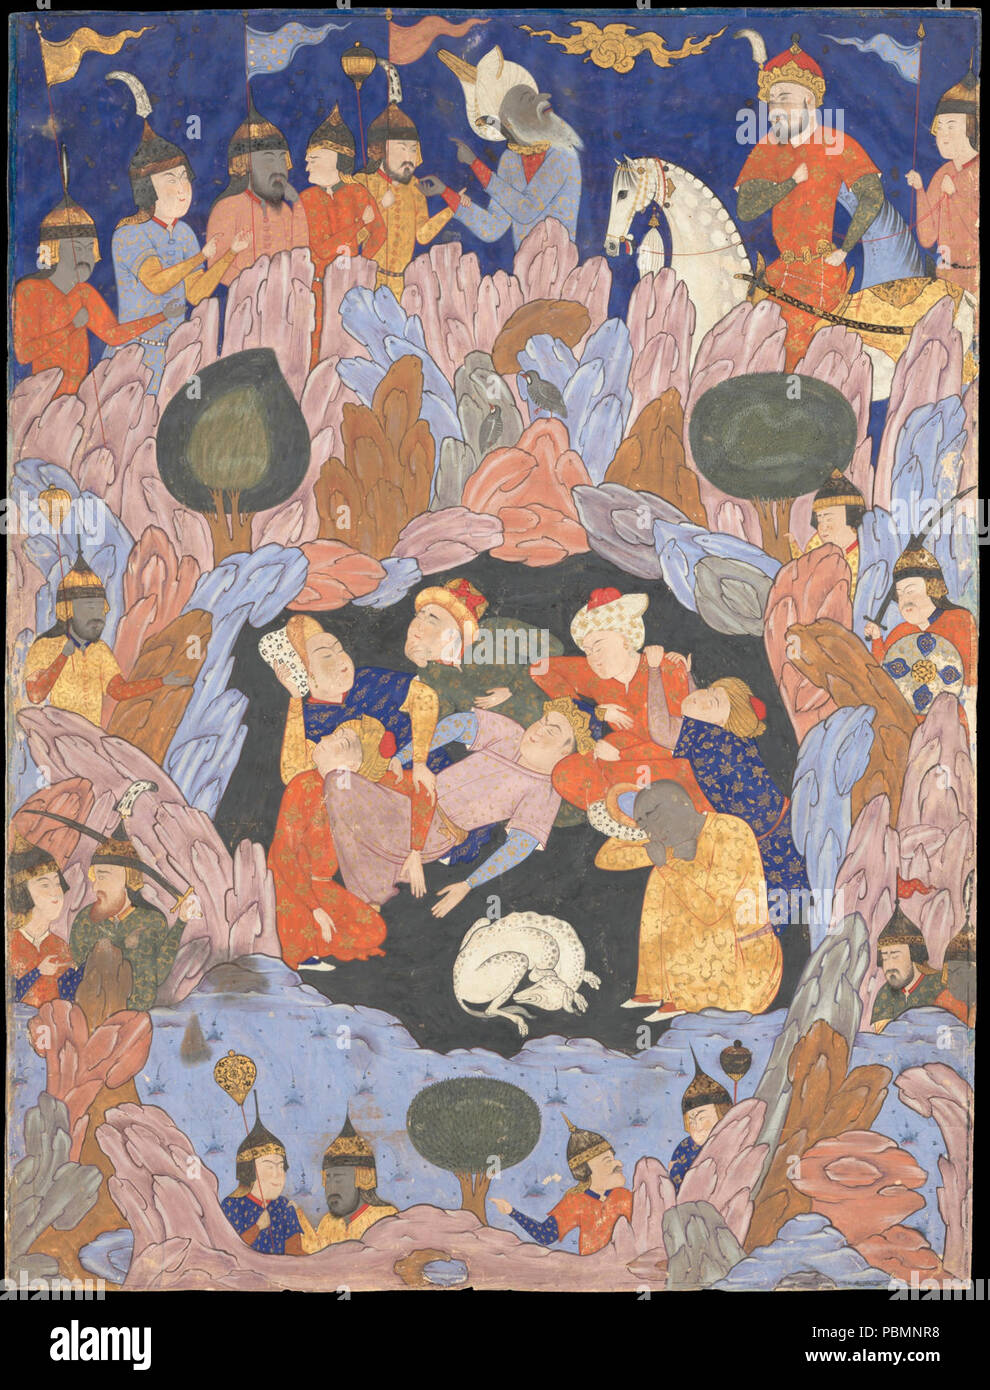 Abd al-Aziz and Aqa Mirek (attr.),The Seven Sleepers of Ephesus Discovered by Alexander the Great, Folio from a Falnama (Book of Omens) 1550s Qazvin, Stock Photo